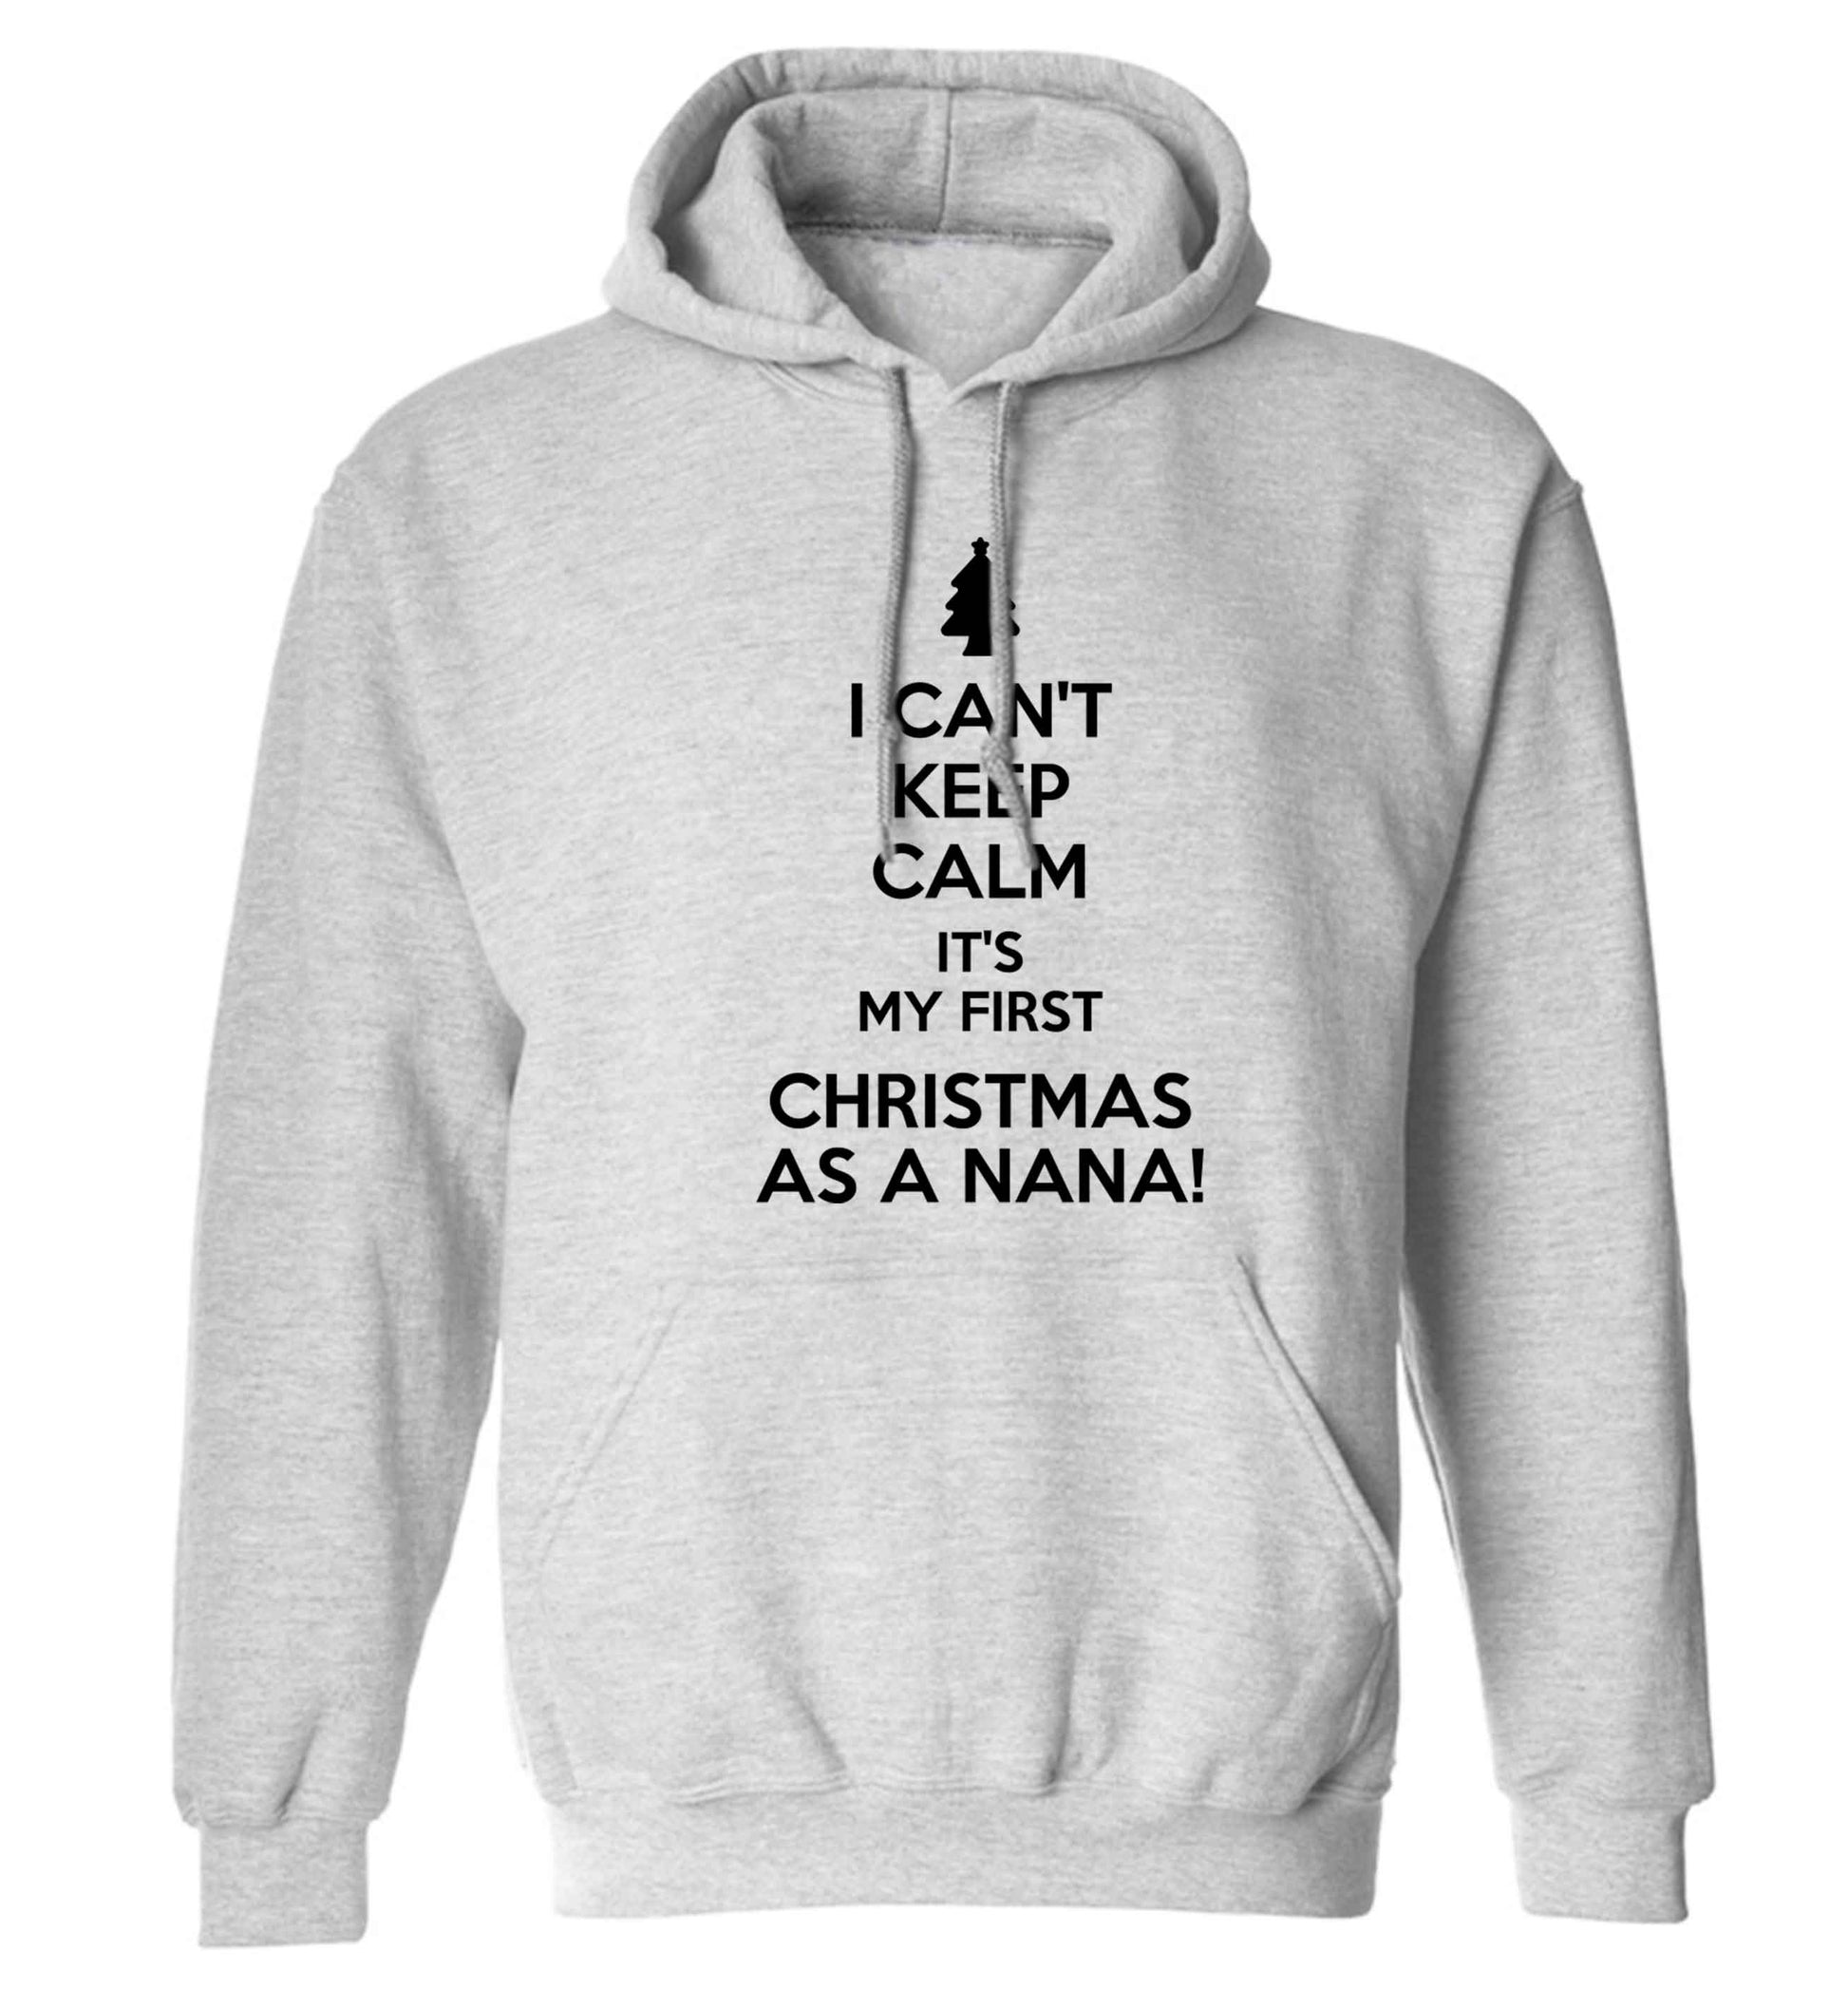 I can't keep calm it's my first Christmas as a nana! adults unisex grey hoodie 2XL